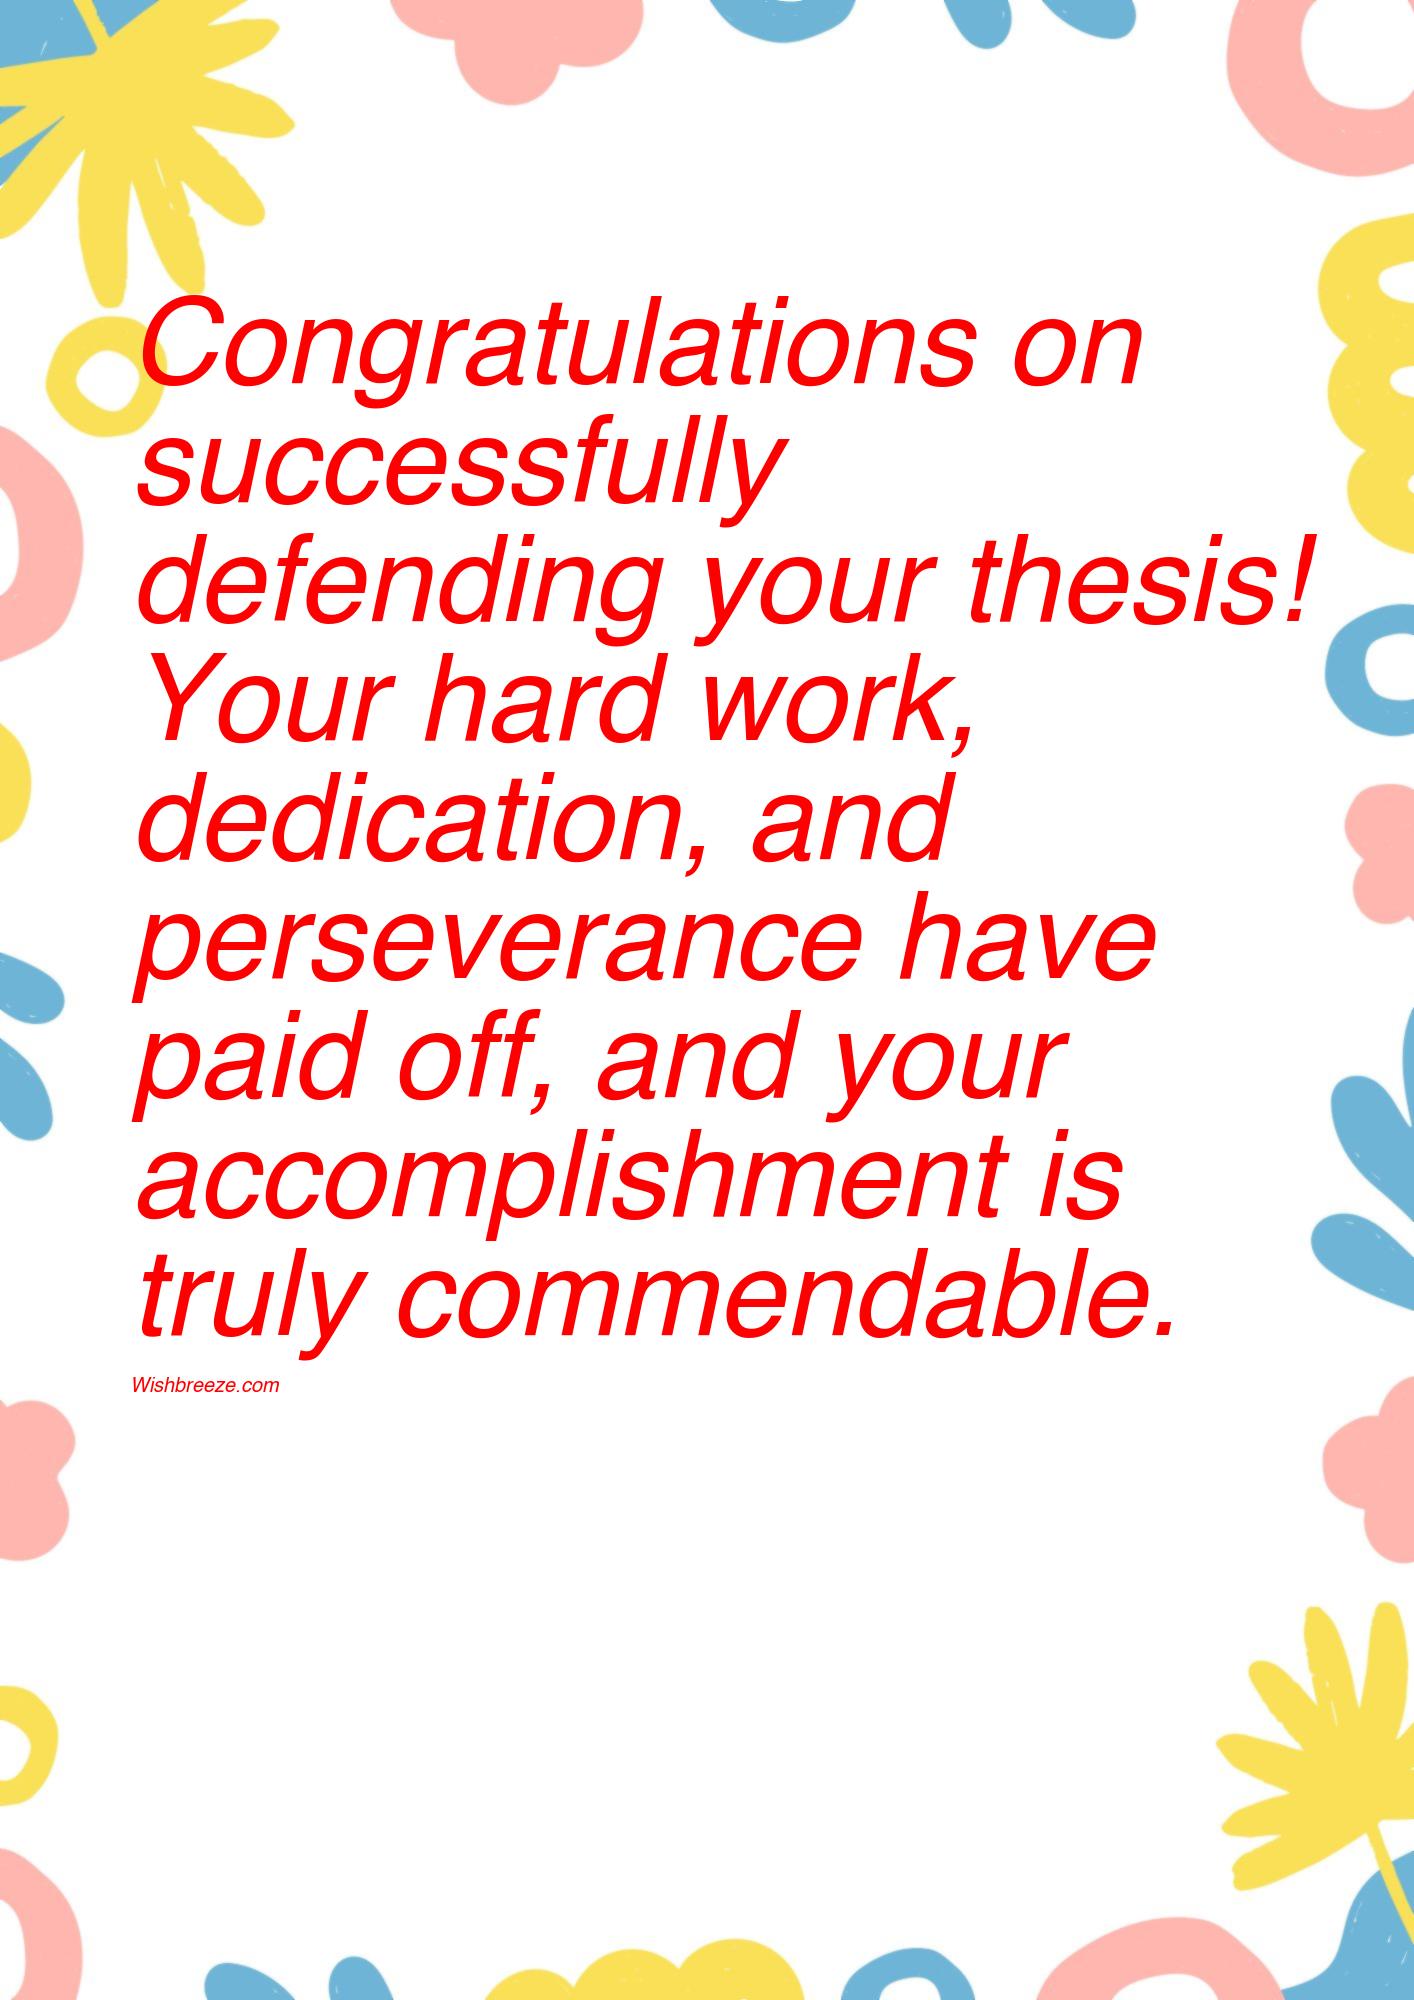 Congratulation Messages for Thesis Defense